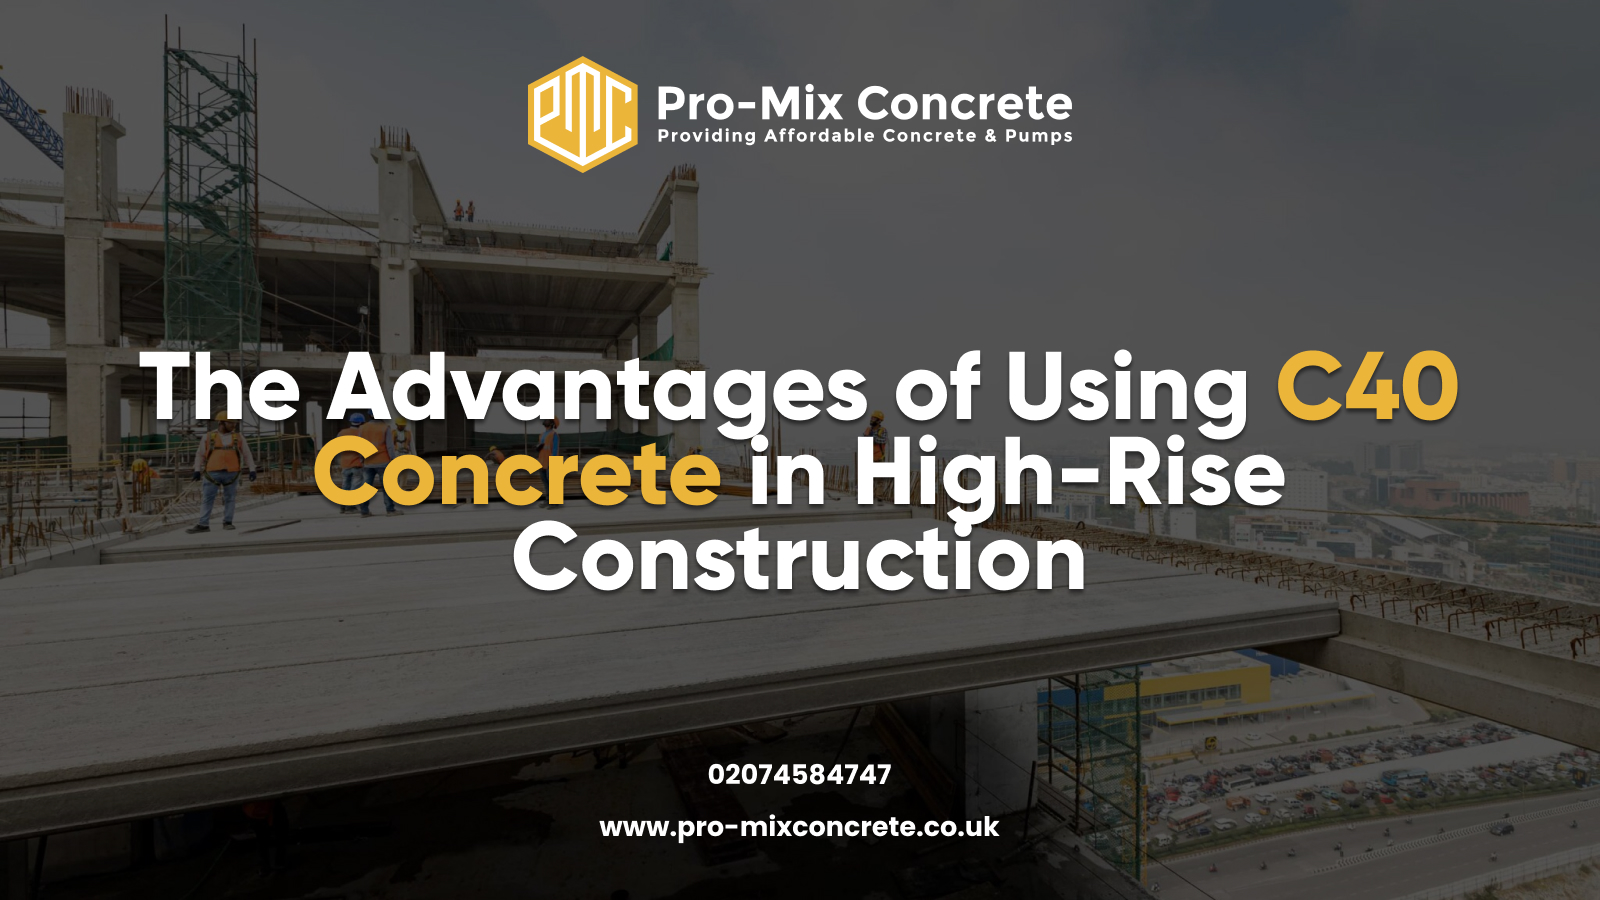 The Advantages of Using C40 Concrete in High-Rise Construction